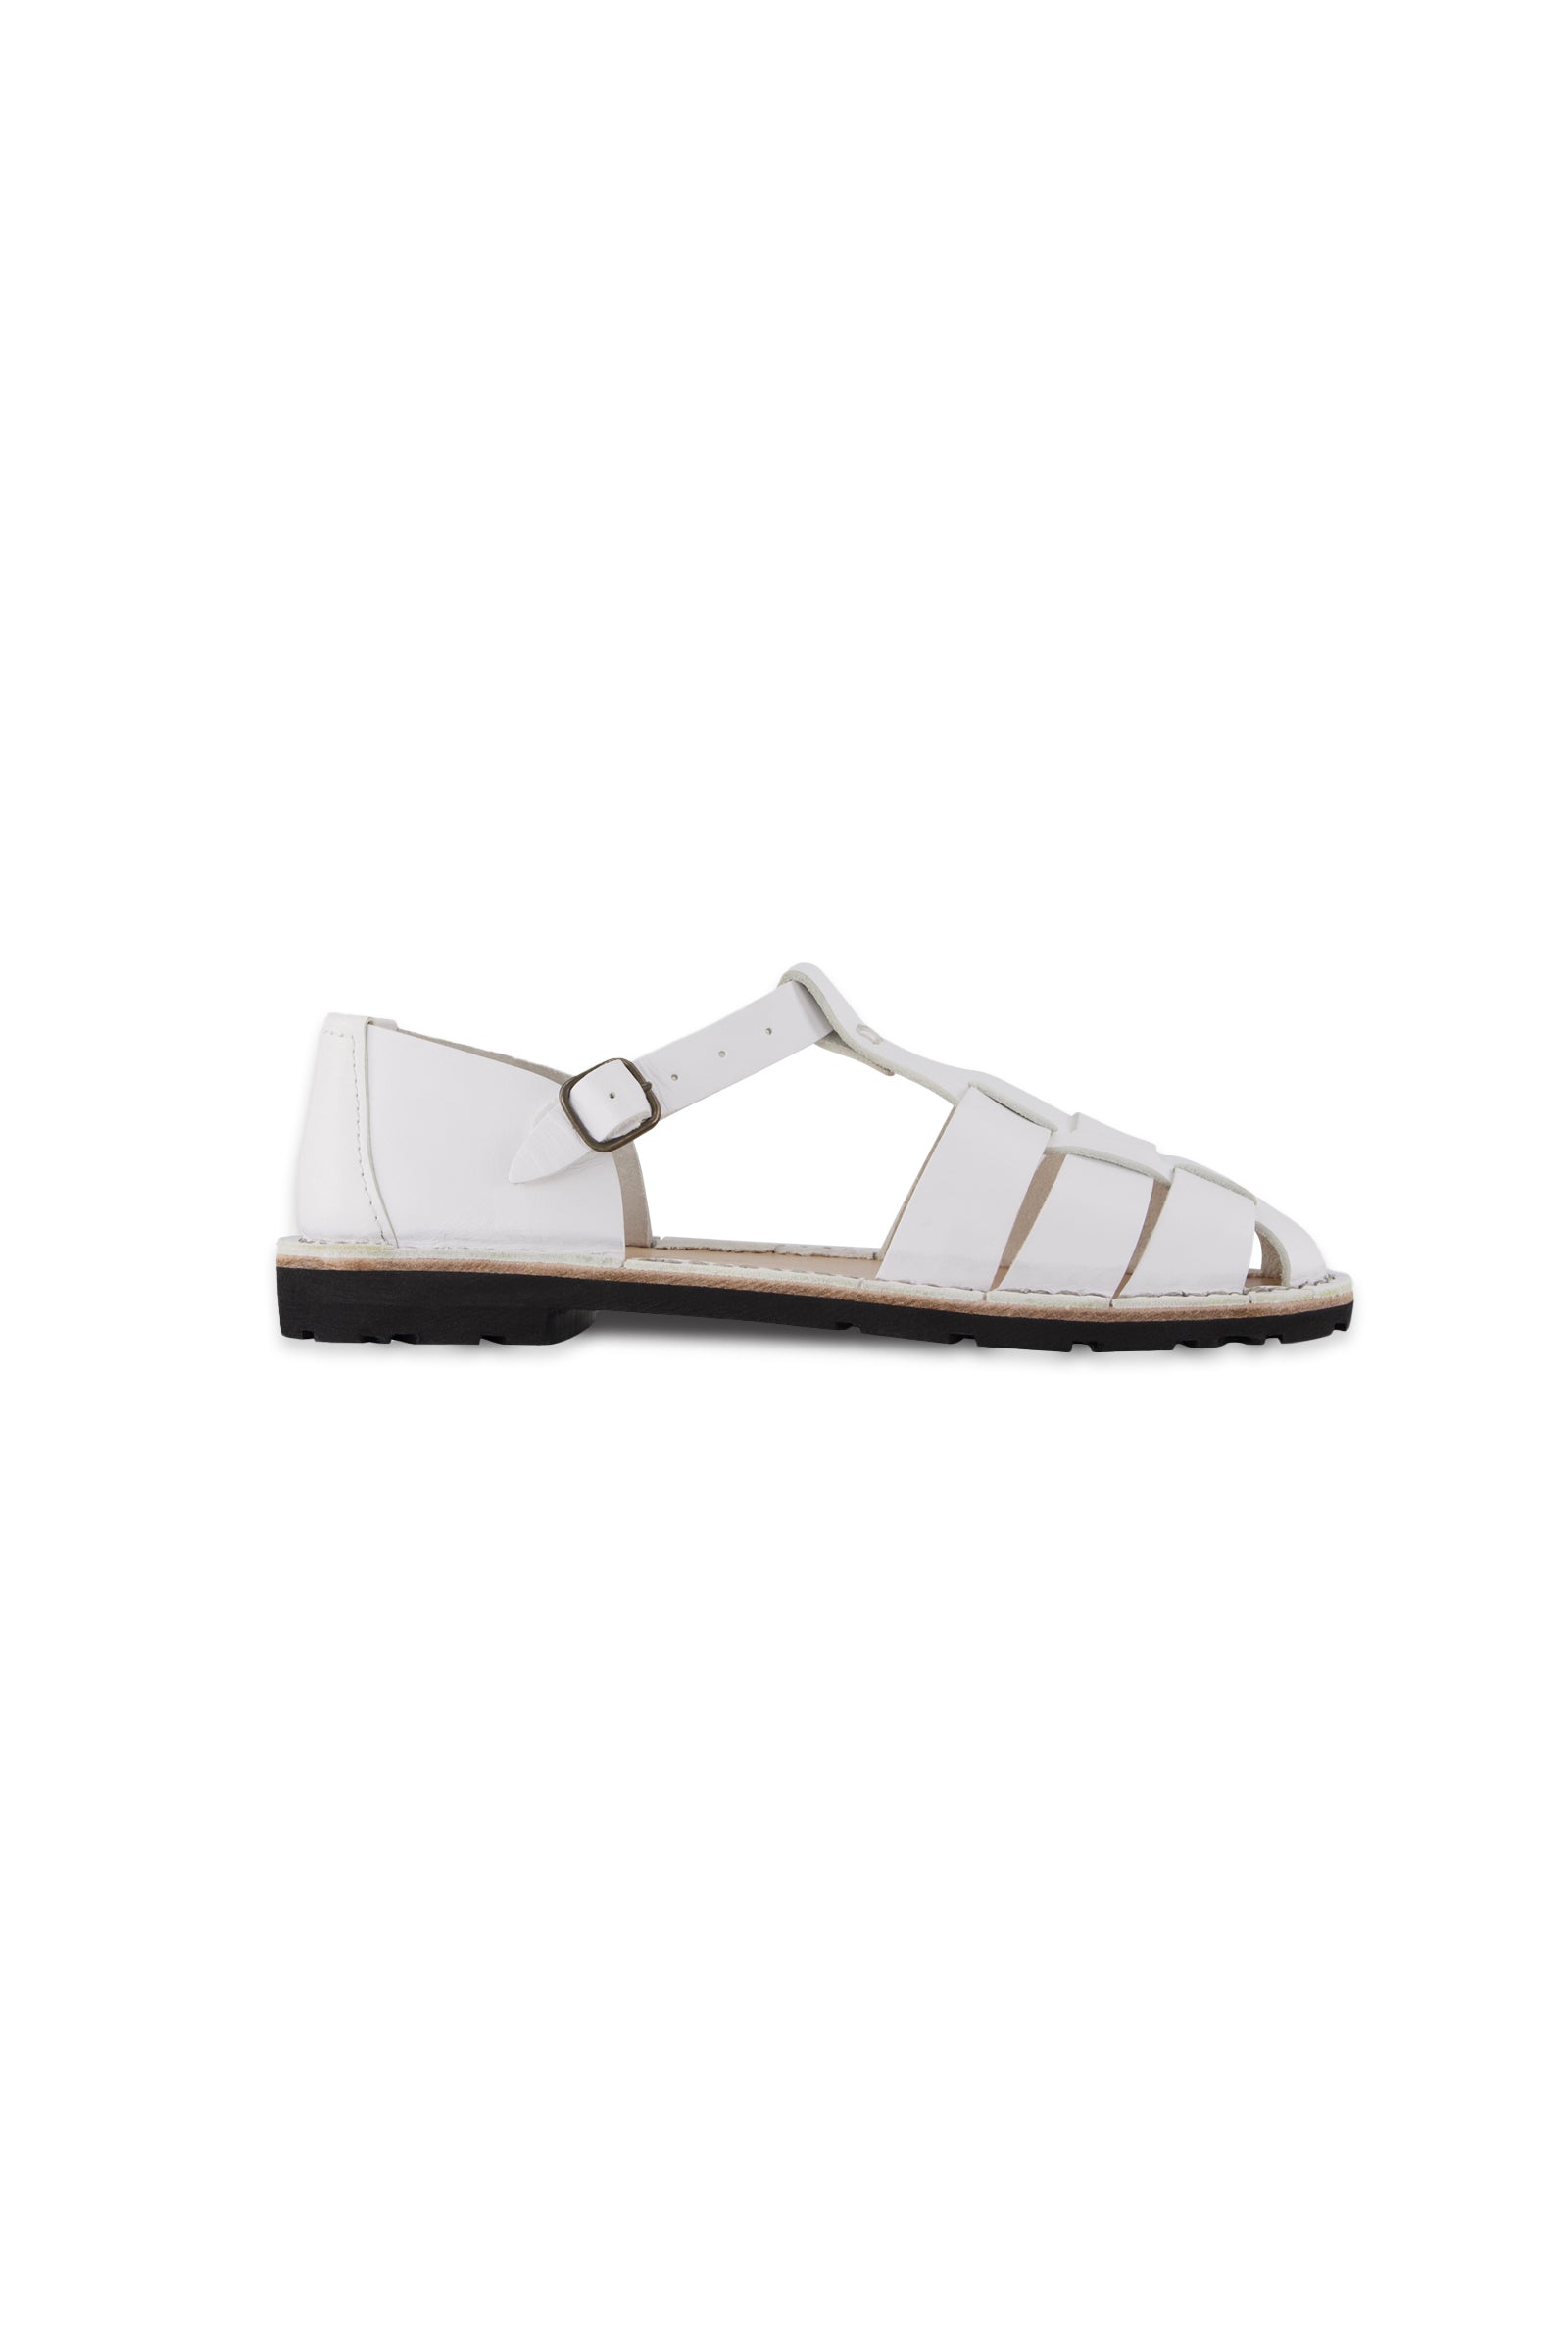 Brock2 Tan Leather Sandals by Supersoft | Shop Online at Styletread NZ